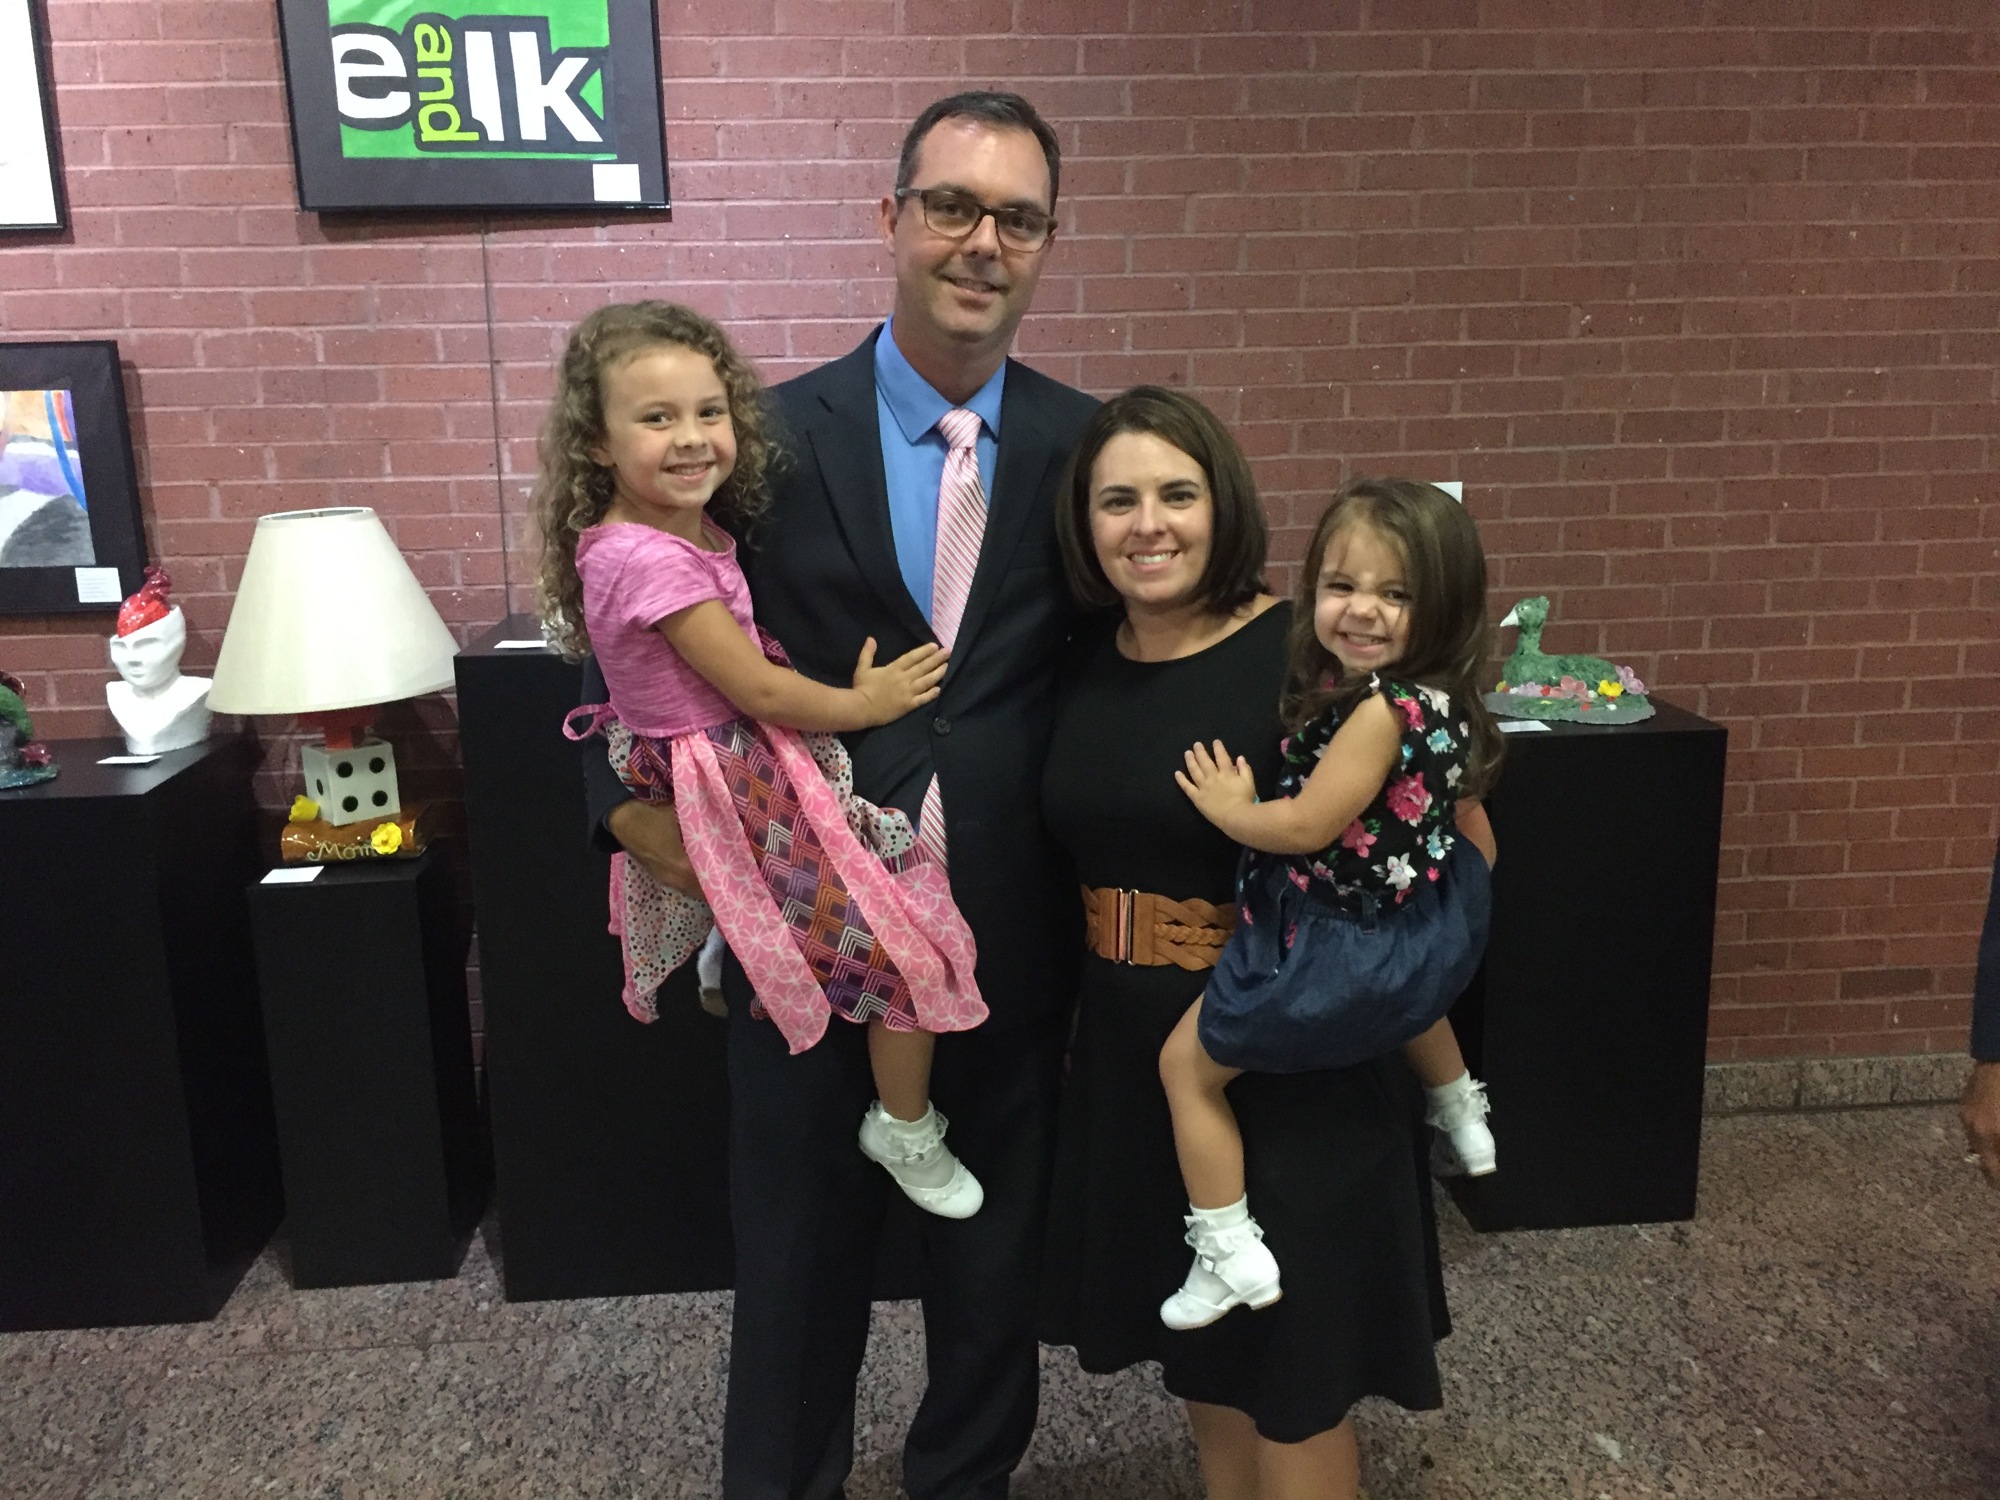 Andrew Jackson is leaving his position as assistant principal at Kissimmee’s Osceola High to become Bridgewater Middle’s new principal. Jackson lives in downtown Winter Garden with his wife and their two daughters.